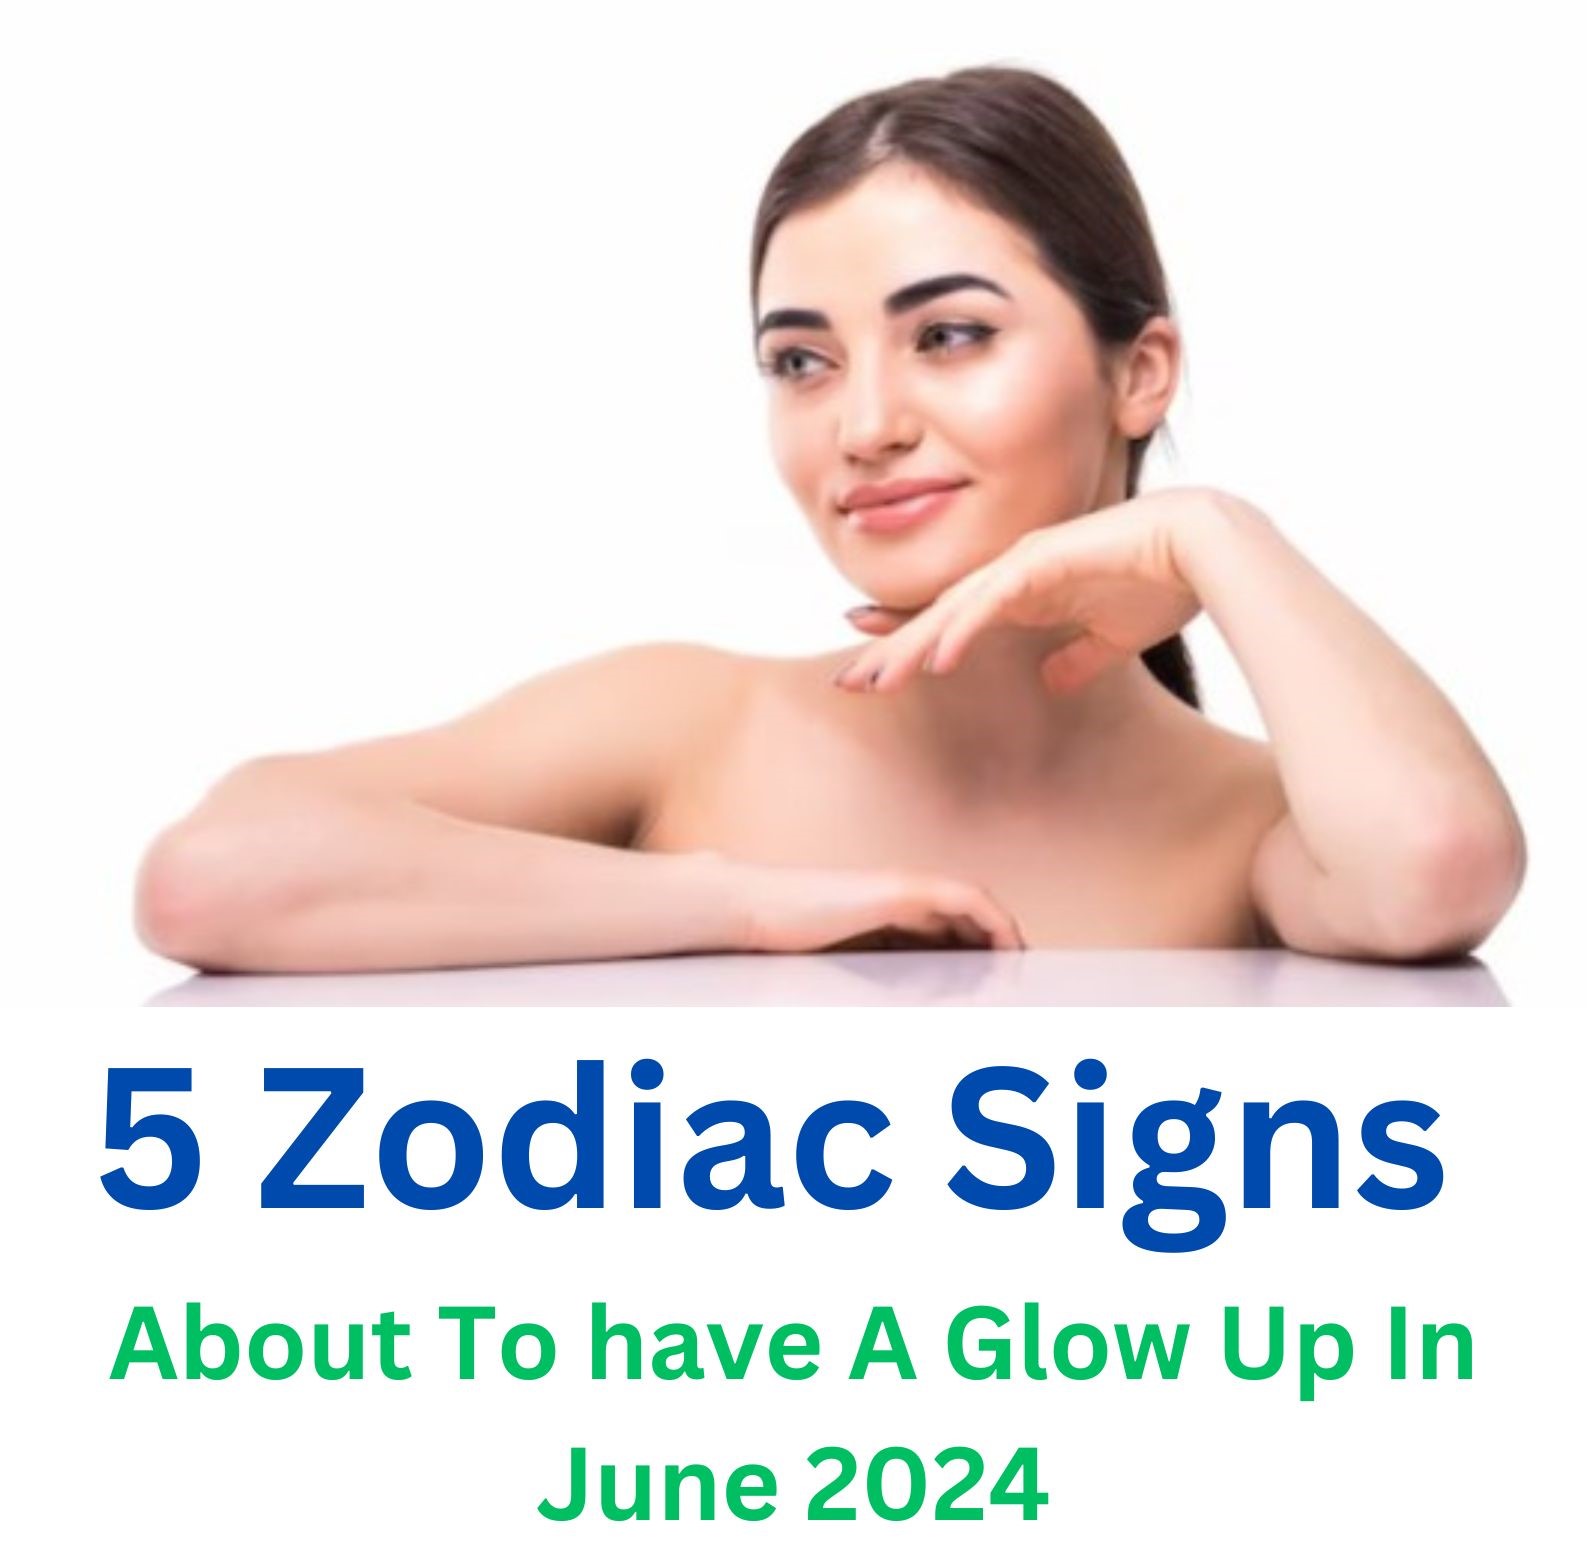 5 Zodiac Signs About To have A Glow Up In June 2024